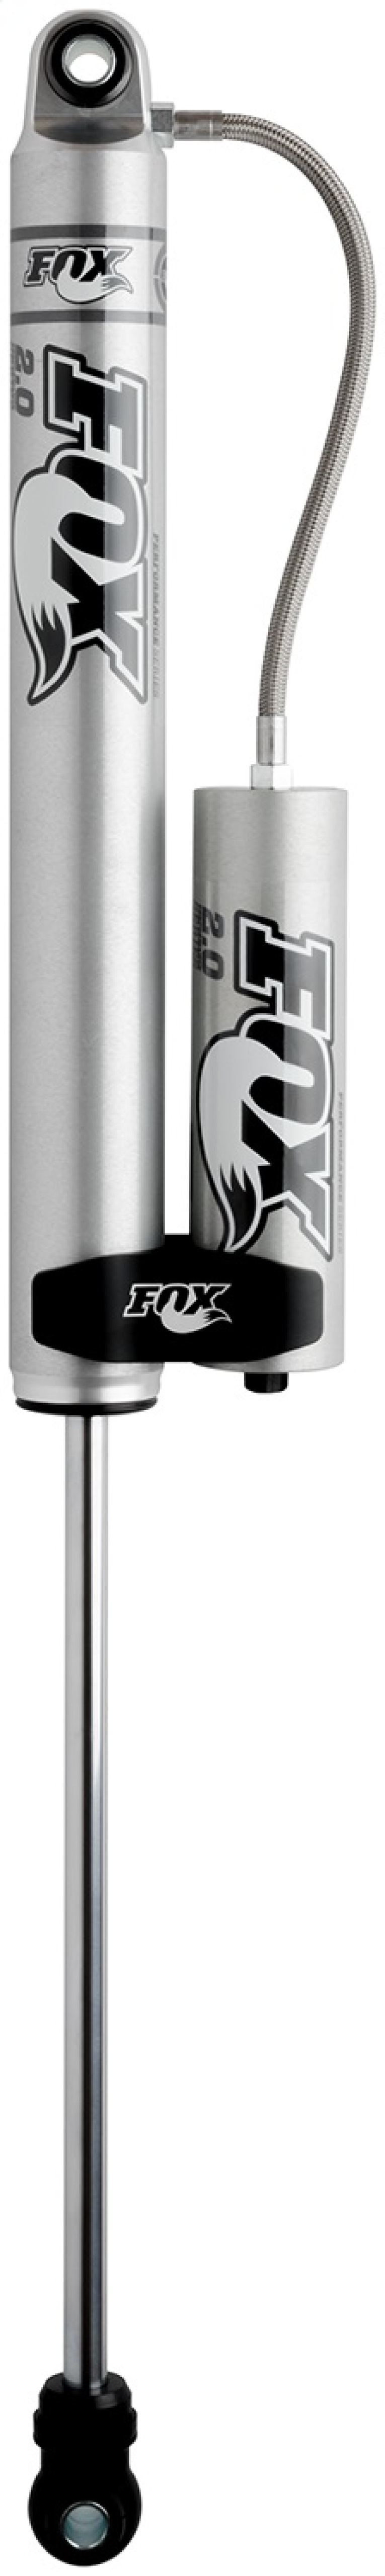 Fox 99+ Chevy HD 2.0 Performance Series 14.1in. Smooth Body Remote Res. Rear Shock / 7-10in. Lift - 980-24-957